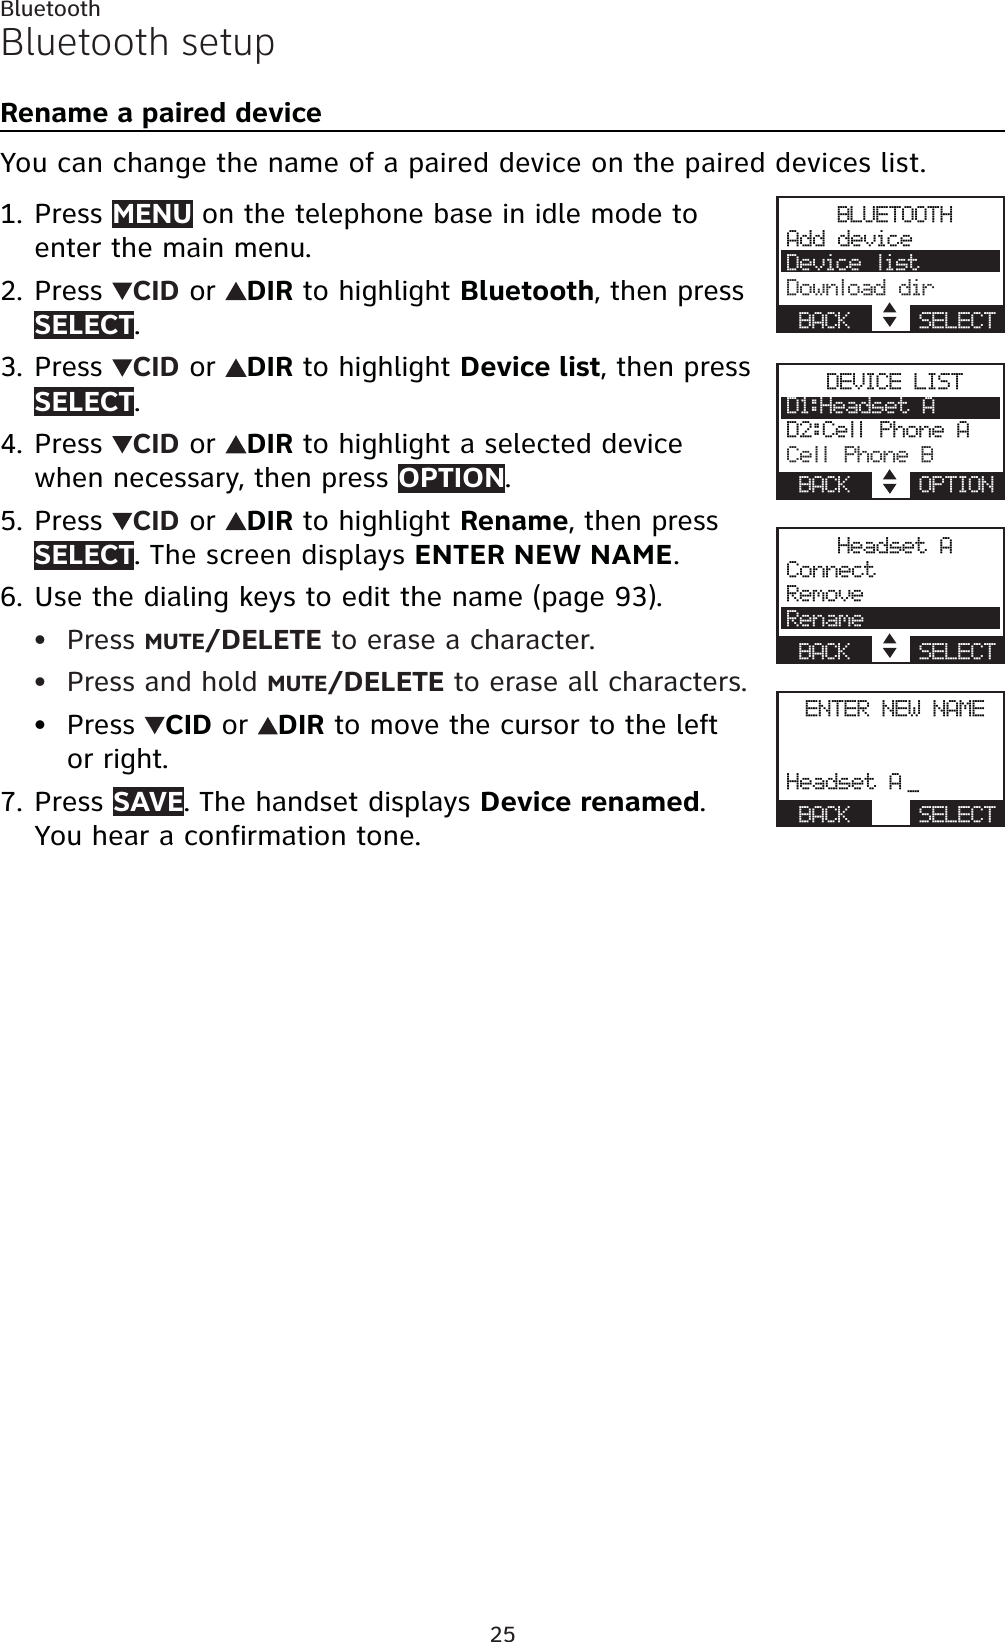 25BluetoothBluetooth setupRename a paired deviceYou can change the name of a paired device on the paired devices list.Press MENU on the telephone base in idle mode to enter the main menu.Press  CID or  DIR to highlight Bluetooth, then press SELECT.Press  CID or  DIR to highlight Device list, then press SELECT.Press  CID or  DIR to highlight a selected device when necessary, then press OPTION.Press  CID or  DIR to highlight Rename, then pressSELECT. The screen displays ENTER NEW NAME.Use the dialing keys to edit the name (page 93).Press MUTE/DELETE to erase a character.Press and hold MUTE/DELETE to erase all characters.Press  CID or  DIR to move the cursor to the left or right.Press SAVE. The handset displays Device renamed.You hear a confirmation tone.1.2.3.4.5.6.•••7.BLUETOOTHAdd deviceDevice listDownload dirBACK    SELECTDEVICE LISTD1:Headset AD2:Cell Phone ACell Phone BBACK    OPTIONHeadset AConnectRemoveRenameBACK    SELECTENTER NEW NAMEHeadset A _BACK    SELECT